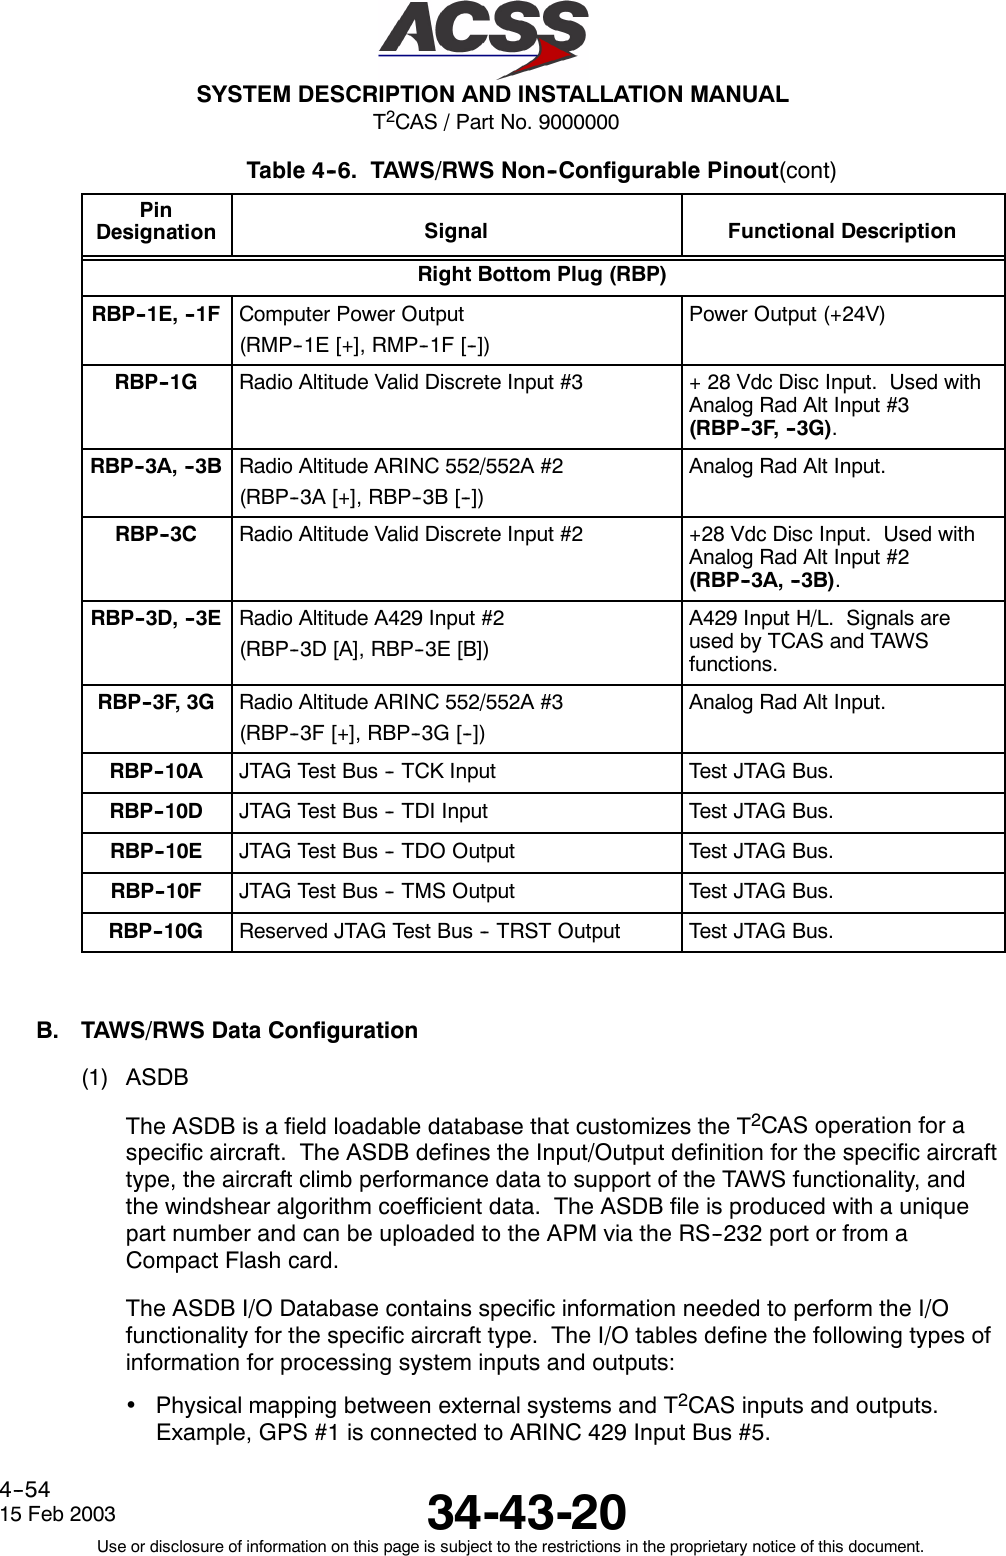 T2CAS / Part No. 9000000SYSTEM DESCRIPTION AND INSTALLATION MANUAL34-43-2015 Feb 2003Use or disclosure of information on this page is subject to the restrictions in the proprietary notice of this document.4--54Table 4--6. TAWS/RWS Non--Configurable Pinout(cont)PinDesignation Functional DescriptionSignalRight Bottom Plug (RBP)RBP--1E, --1F Computer Power Output(RMP--1E [+], RMP--1F [--])Power Output (+24V)RBP--1G Radio Altitude Valid Discrete Input #3 + 28 Vdc Disc Input. Used withAnalog Rad Alt Input #3(RBP--3F, --3G).RBP--3A, --3B Radio Altitude ARINC 552/552A #2(RBP--3A [+], RBP--3B [--])Analog Rad Alt Input.RBP--3C Radio Altitude Valid Discrete Input #2 +28 Vdc Disc Input. Used withAnalog Rad Alt Input #2(RBP--3A, --3B).RBP--3D, --3E Radio Altitude A429 Input #2(RBP--3D [A], RBP--3E [B])A429 Input H/L. Signals areused by TCAS and TAWSfunctions.RBP--3F, 3G Radio Altitude ARINC 552/552A #3(RBP--3F [+], RBP--3G [--])Analog Rad Alt Input.RBP--10A JTAG Test Bus -- TCK Input Test JTAG Bus.RBP--10D JTAG Test Bus -- TDI Input Test JTAG Bus.RBP--10E JTAG Test Bus -- TDO Output Test JTAG Bus.RBP--10F JTAG Test Bus -- TMS Output Test JTAG Bus.RBP--10G Reserved JTAG Test Bus -- TRST Output Test JTAG Bus.B. TAWS/RWS Data Configuration(1) ASDBThe ASDB is a field loadable database that customizes the T2CAS operation for aspecific aircraft. The ASDB defines the Input/Output definition for the specific aircrafttype, the aircraft climb performance data to support of the TAWS functionality, andthe windshear algorithm coefficient data. The ASDB file is produced with a uniquepart number and can be uploaded to the APM via the RS--232 port or from aCompact Flash card.The ASDB I/O Database contains specific information needed to perform the I/Ofunctionality for the specific aircraft type. The I/O tables define the following types ofinformation for processing system inputs and outputs:•Physical mapping between external systems and T2CAS inputs and outputs.Example, GPS #1 is connected to ARINC 429 Input Bus #5.